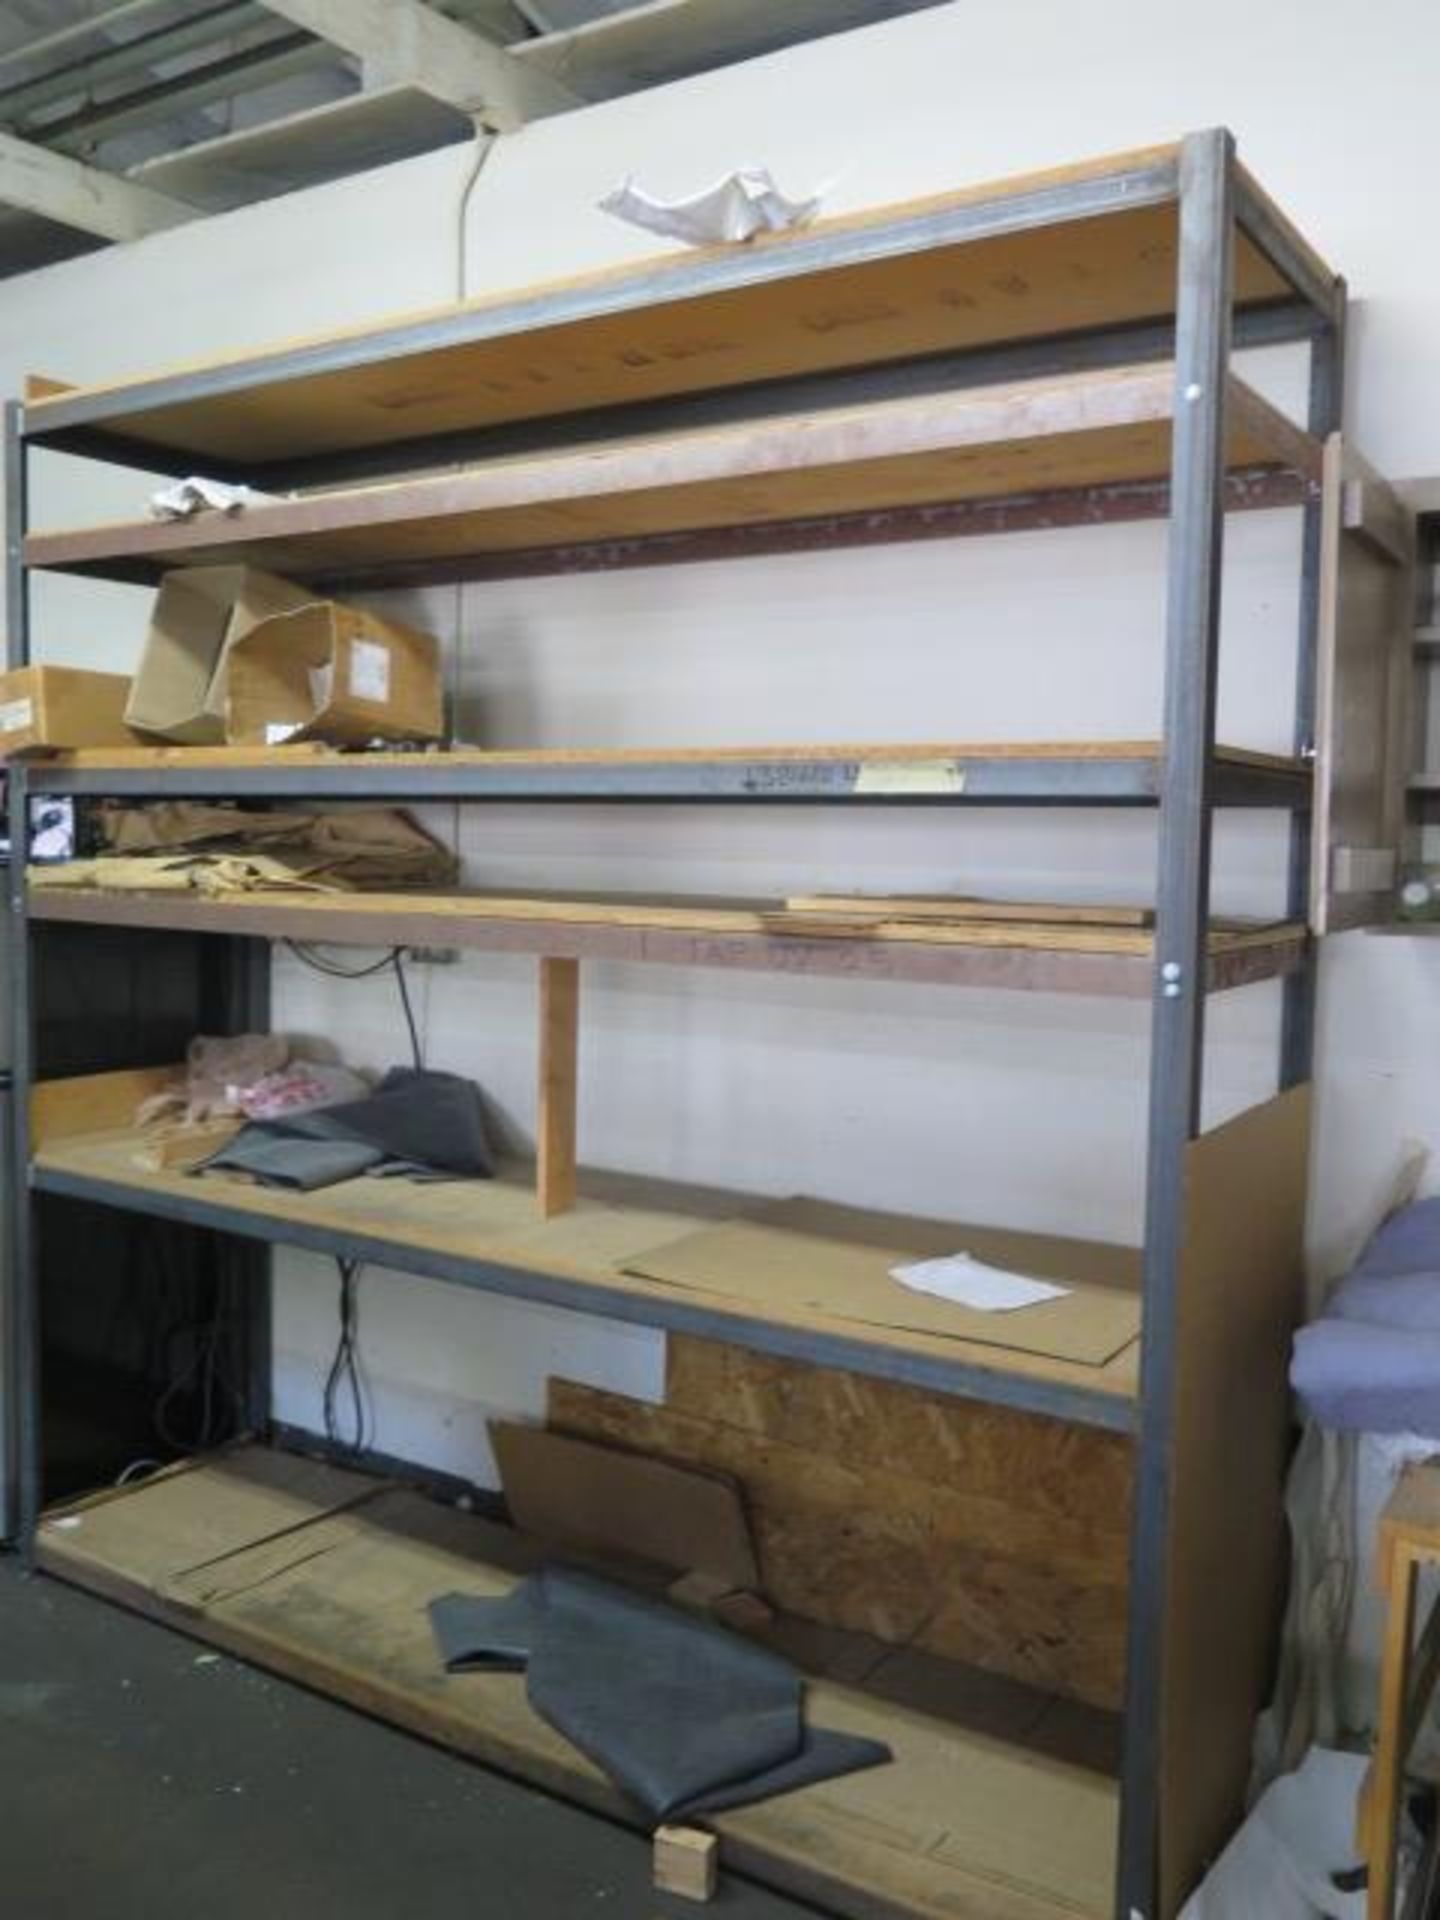 Shelving and Racks (SOLD AS-IS - NO WARRANTY) - Image 4 of 6